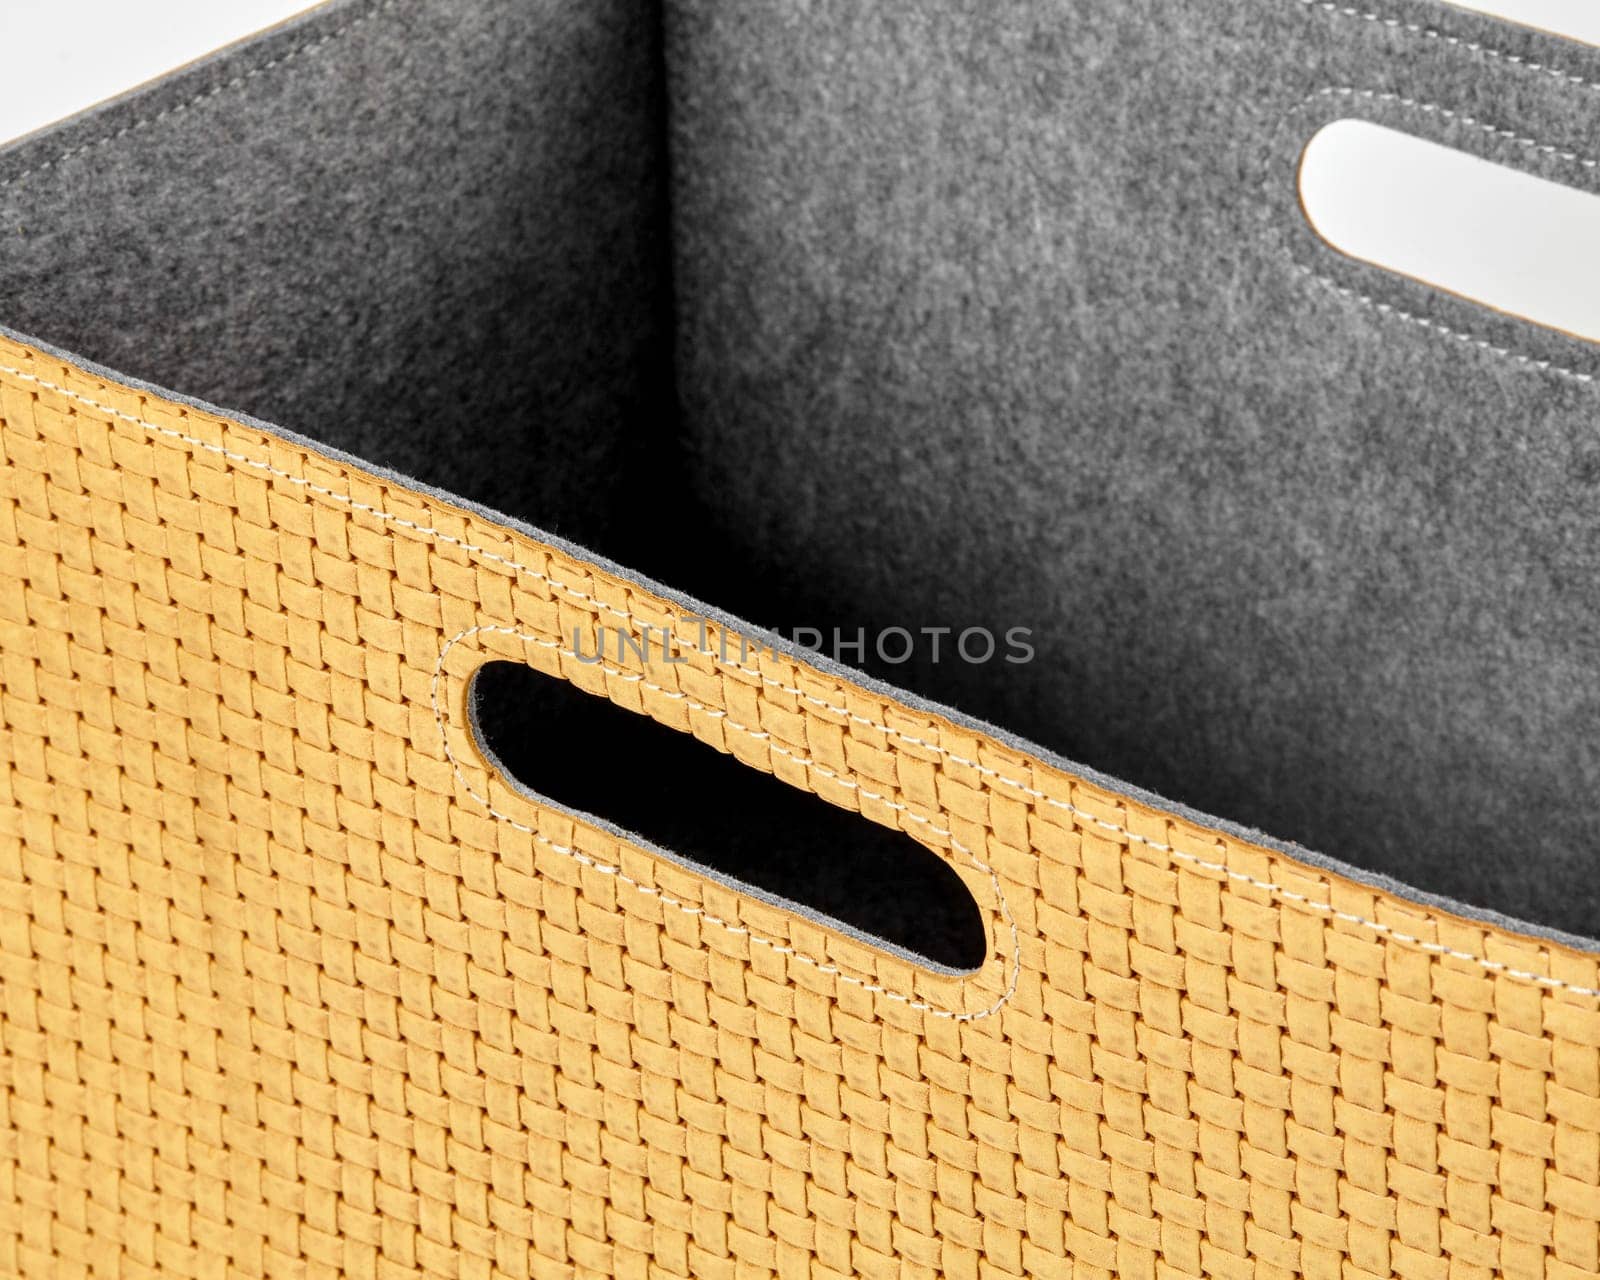 Detailed close-up of storage box with tan braided suede exterior and grey felt interior completed with practical cut-out handle, showcasing quality craftsmanship of stylish furnishing accessory